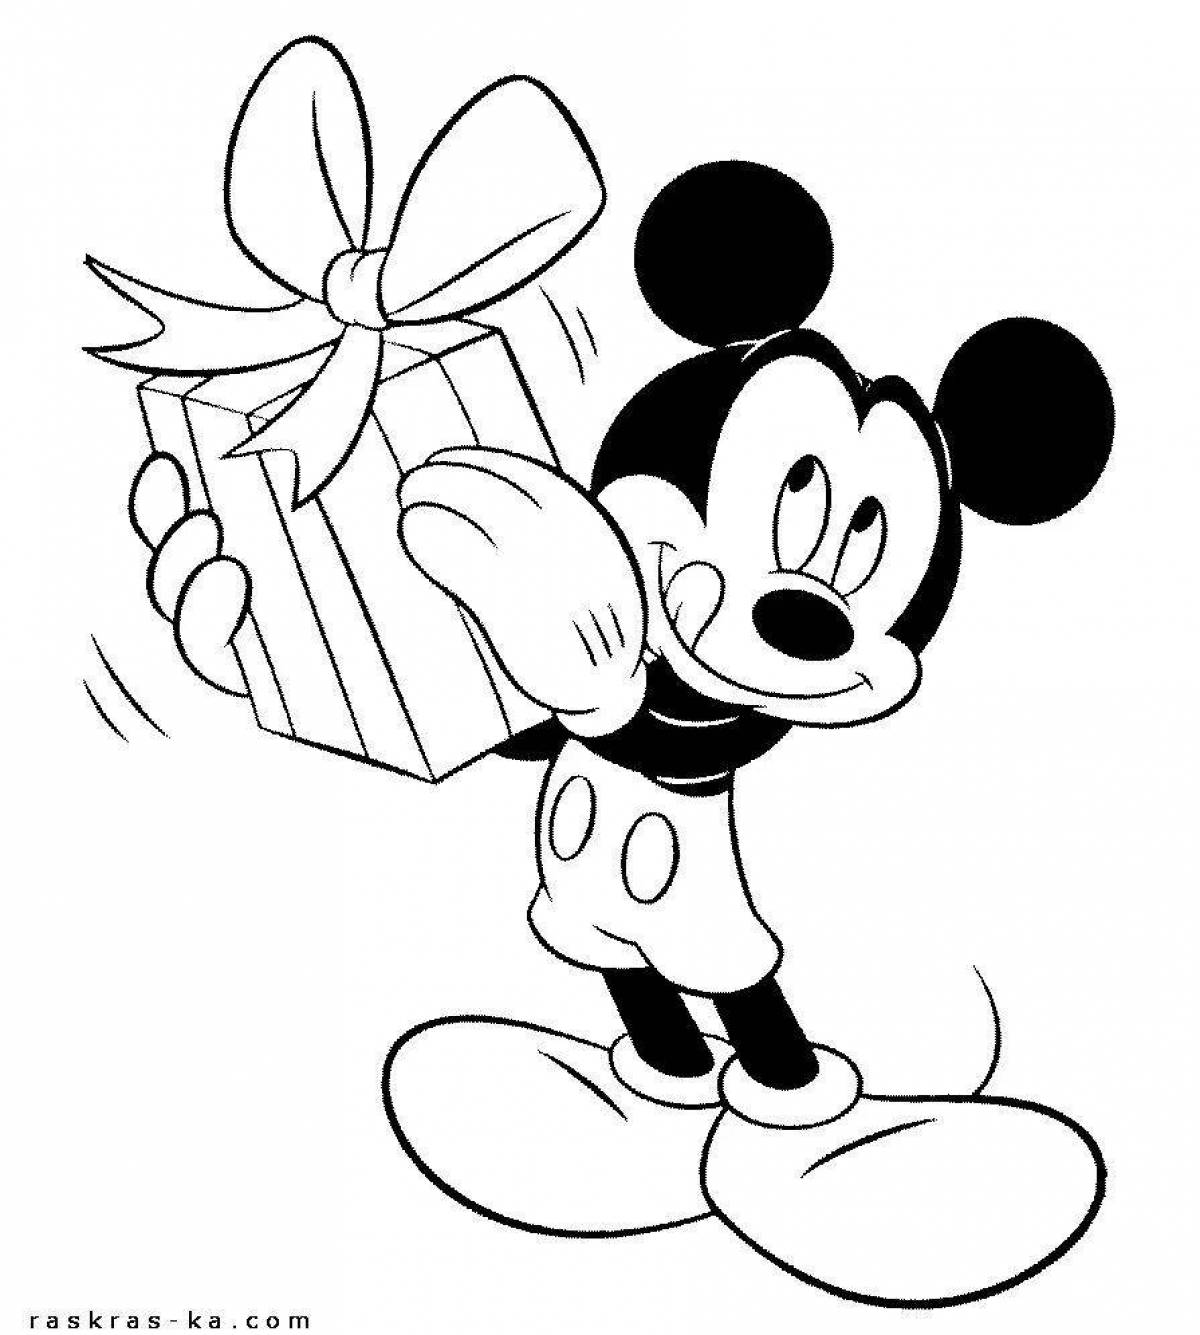 Mickey mouse coloring book for kids